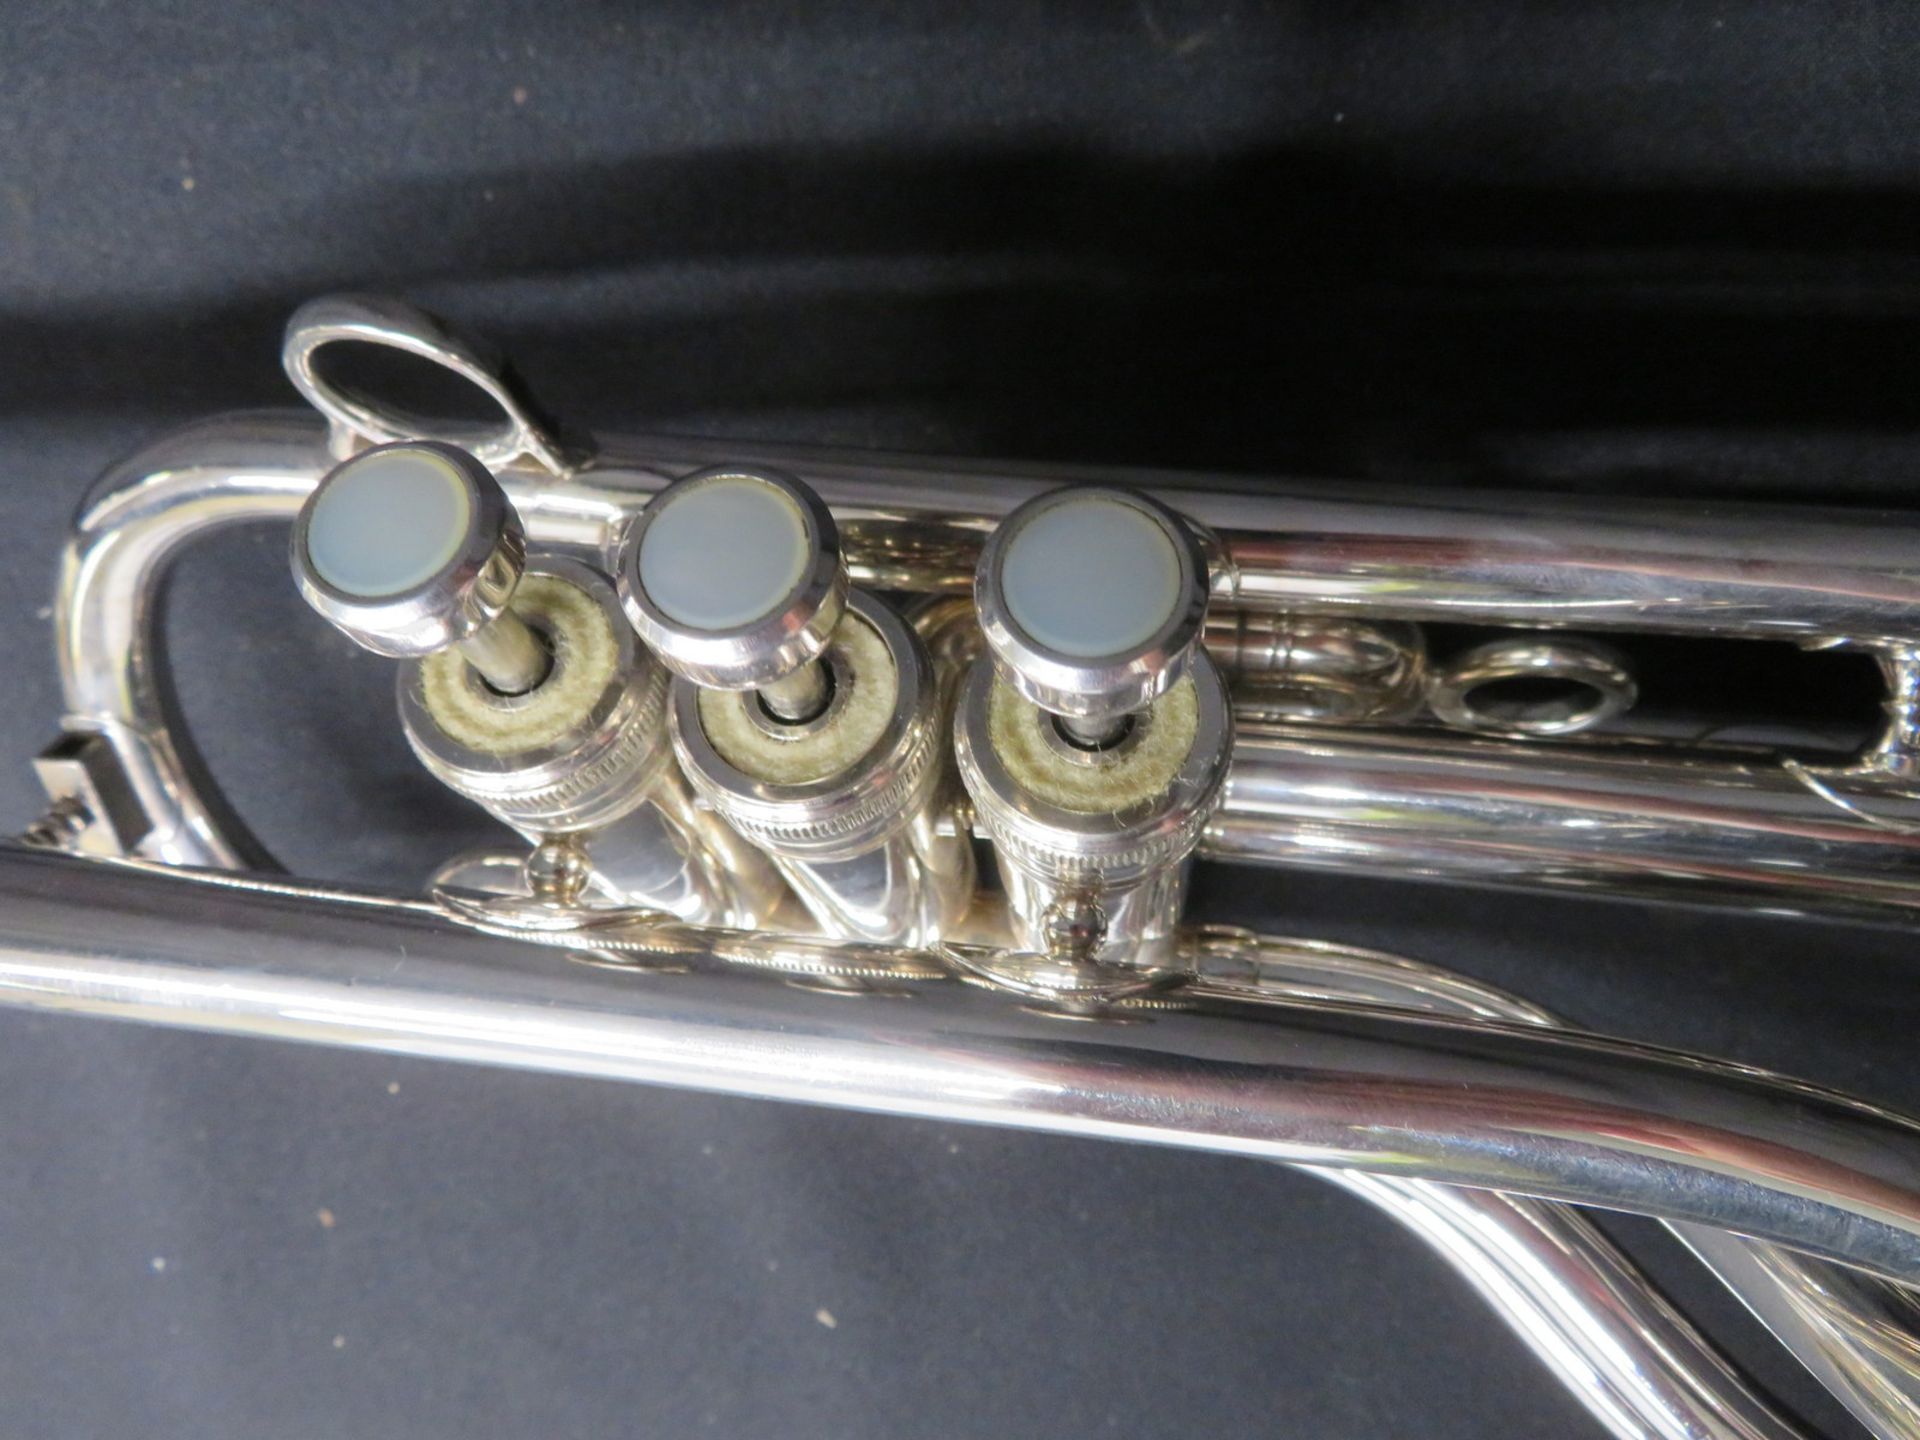 Boosey & Hawkes Besson 700 London tenor fanfare trumpet with case. Serial number: 707-740320. - Image 8 of 19